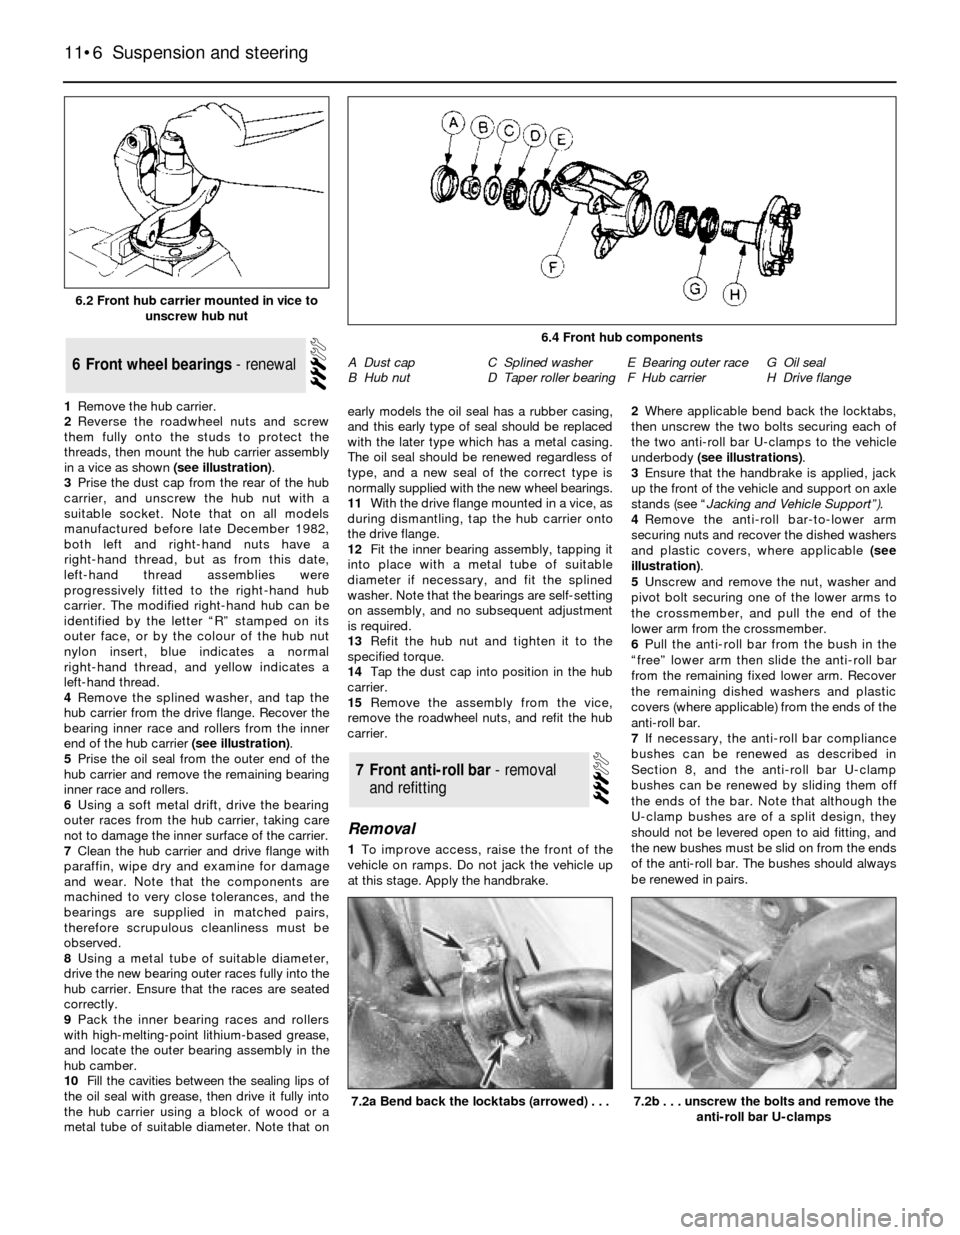 FORD SIERRA 1989 2.G Suspension And Steering Workshop Manual 1Remove the hub carrier.
2Reverse the roadwheel nuts and screw
them fully onto the studs to protect the
threads, then mount the hub carrier assembly
in a vice as shown (see illustration).
3Prise the d